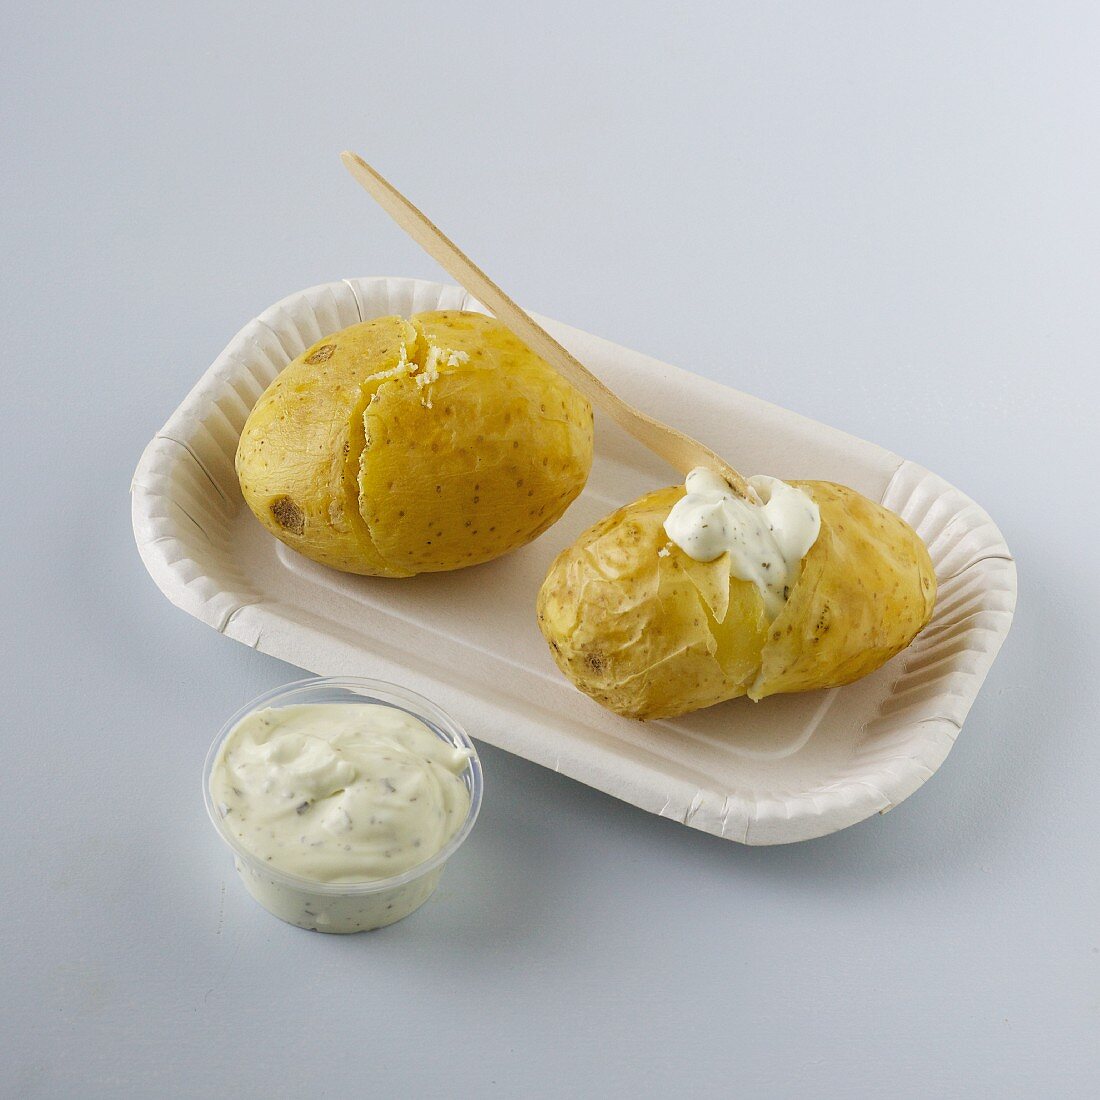 Baked potatoes with a quark dip to takeaway